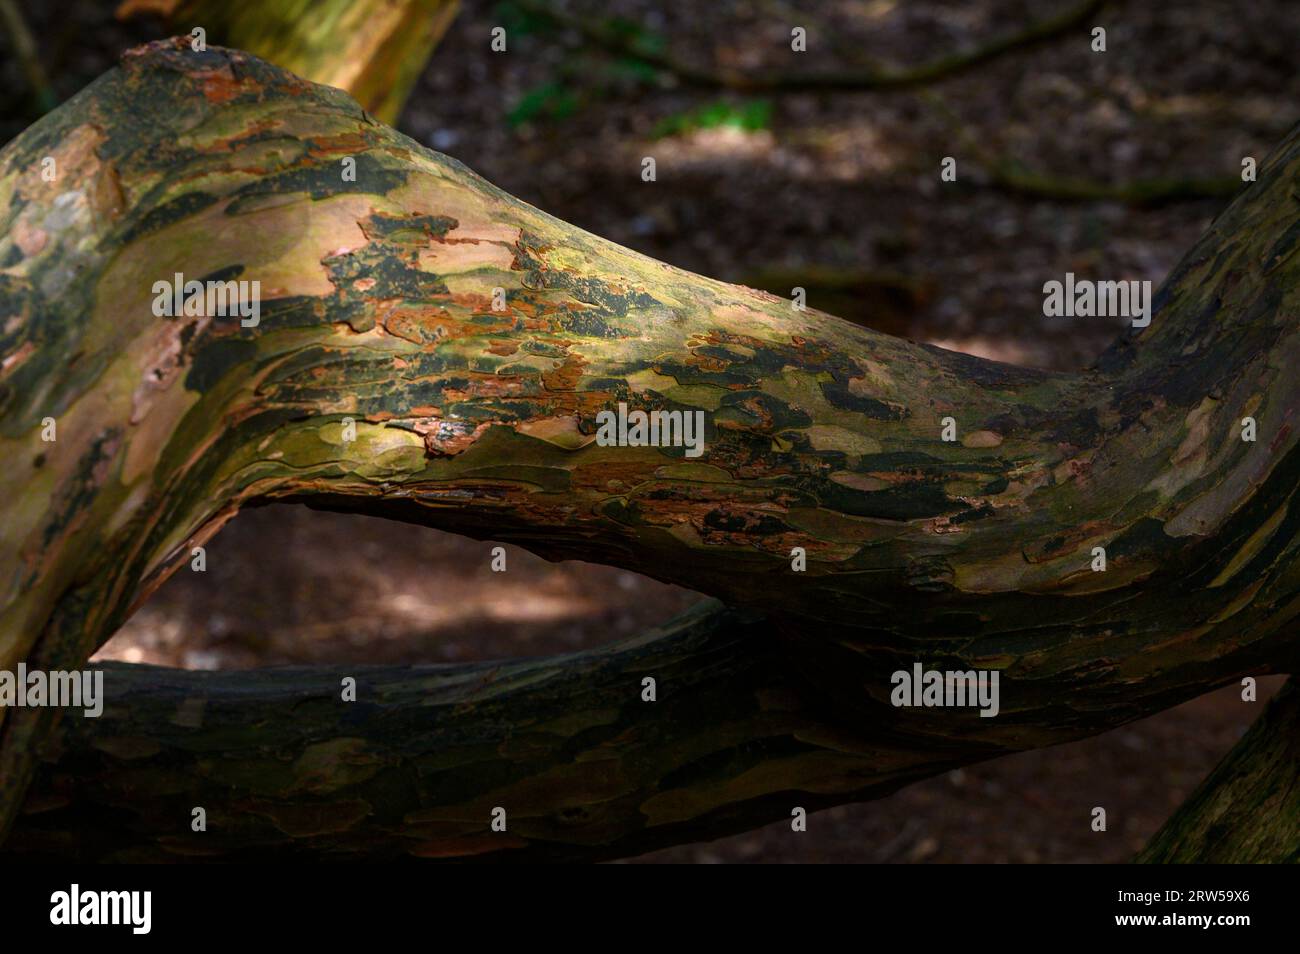 Closeup details of a yew tree bough with flaking bark in dappled sunlight in Kingley Vale ancient yew forest, West Sussex, England. Stock Photo